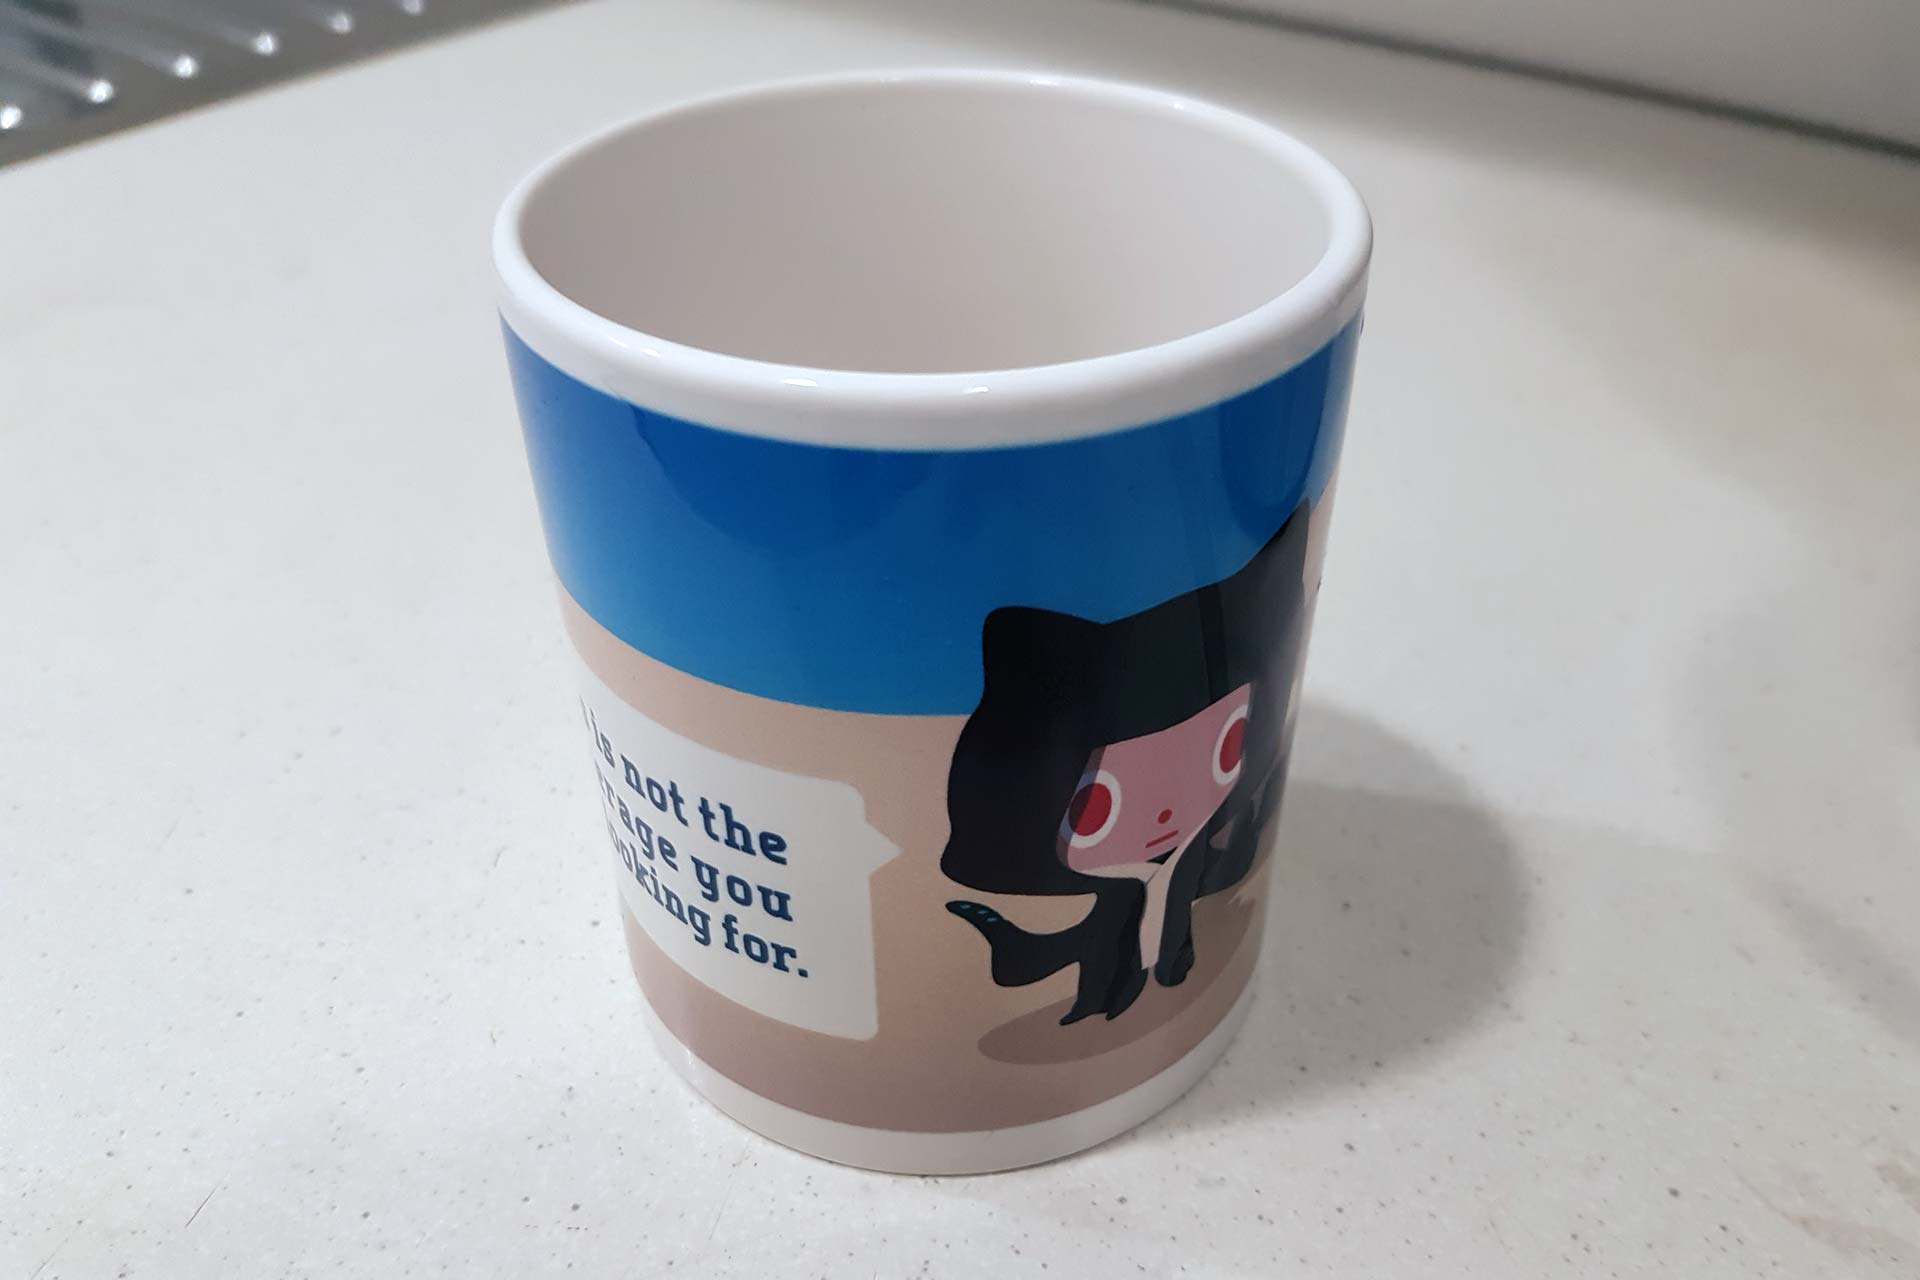 Git - GitHub Cup - Tools for website developers